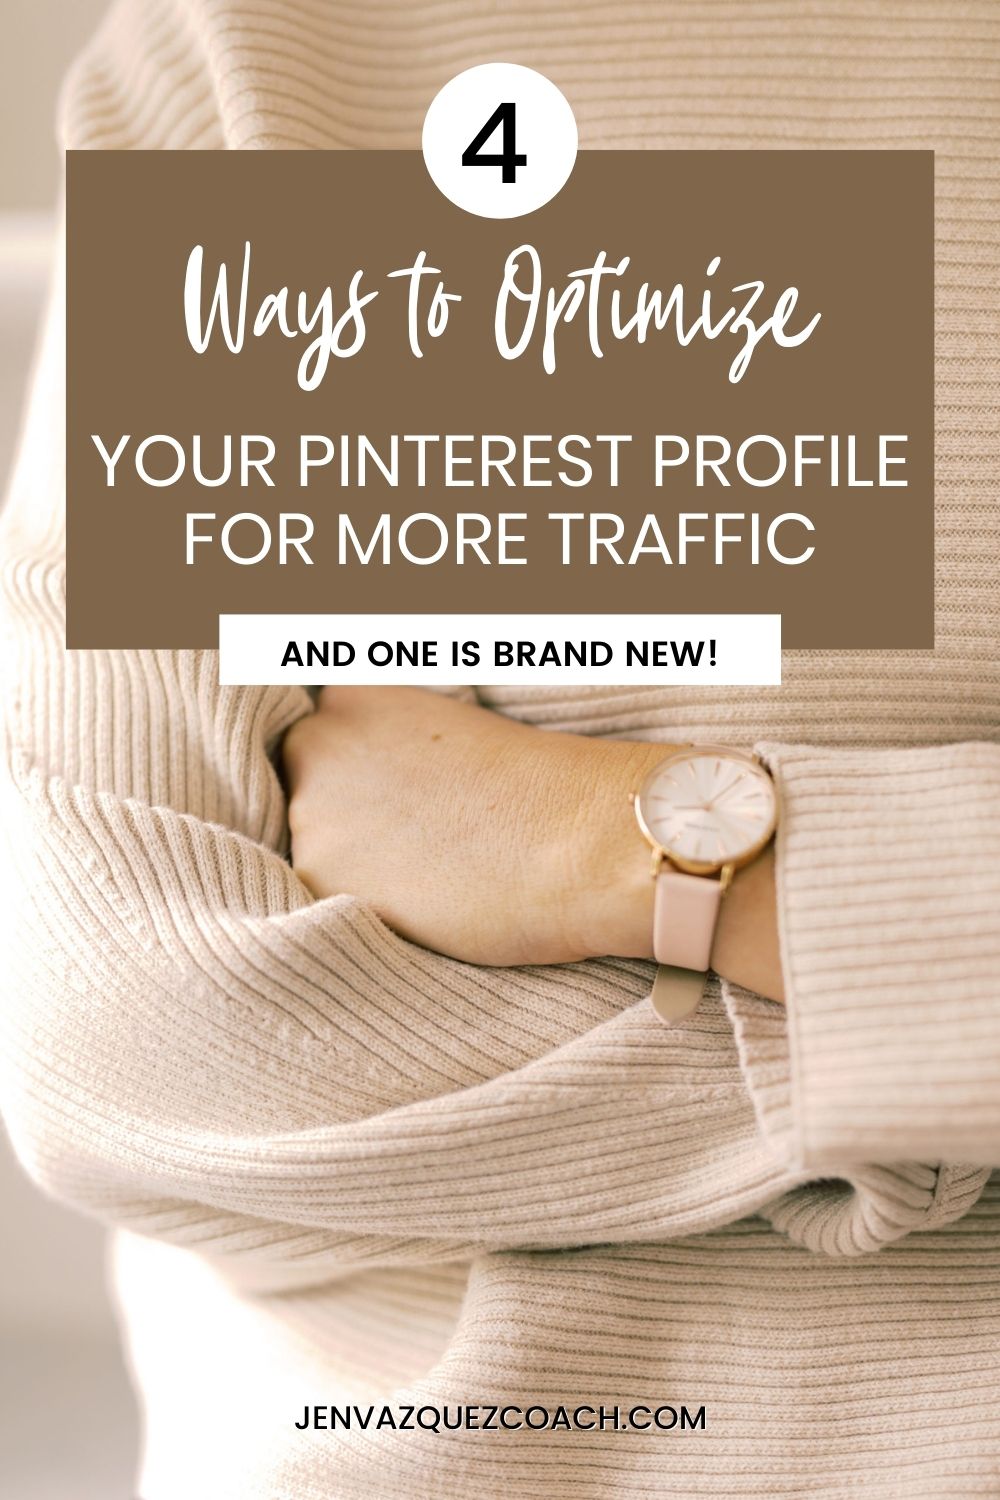 4 Ways to Optimize Your Pinterest Profile for More Traffic (and one is NEW!)